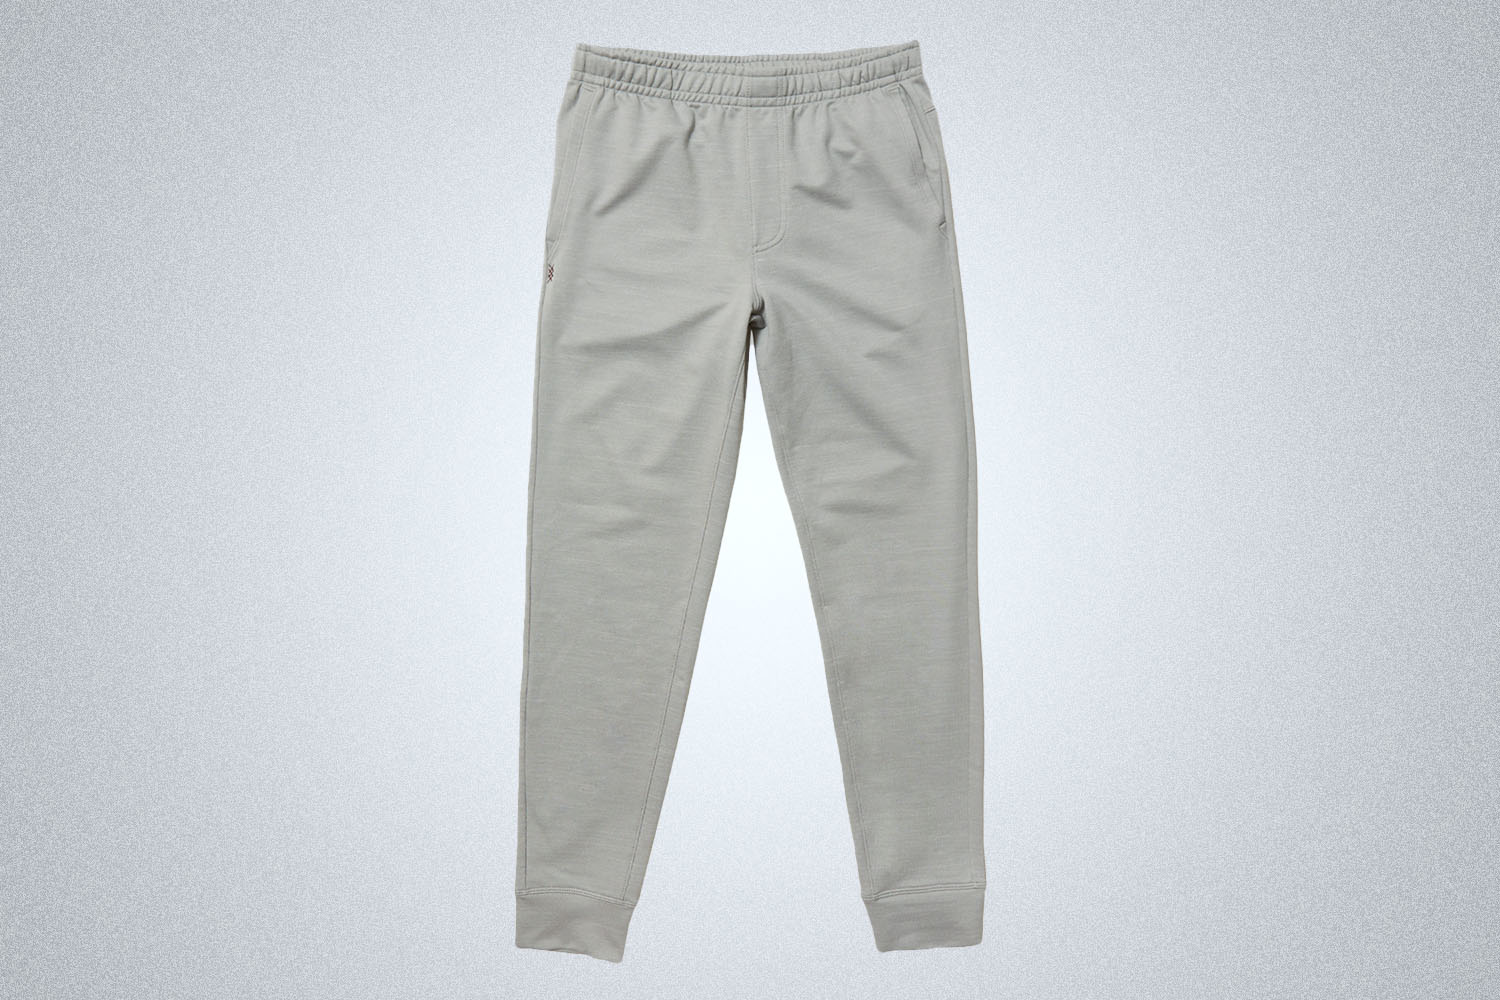 a pair of luxurious great sweats